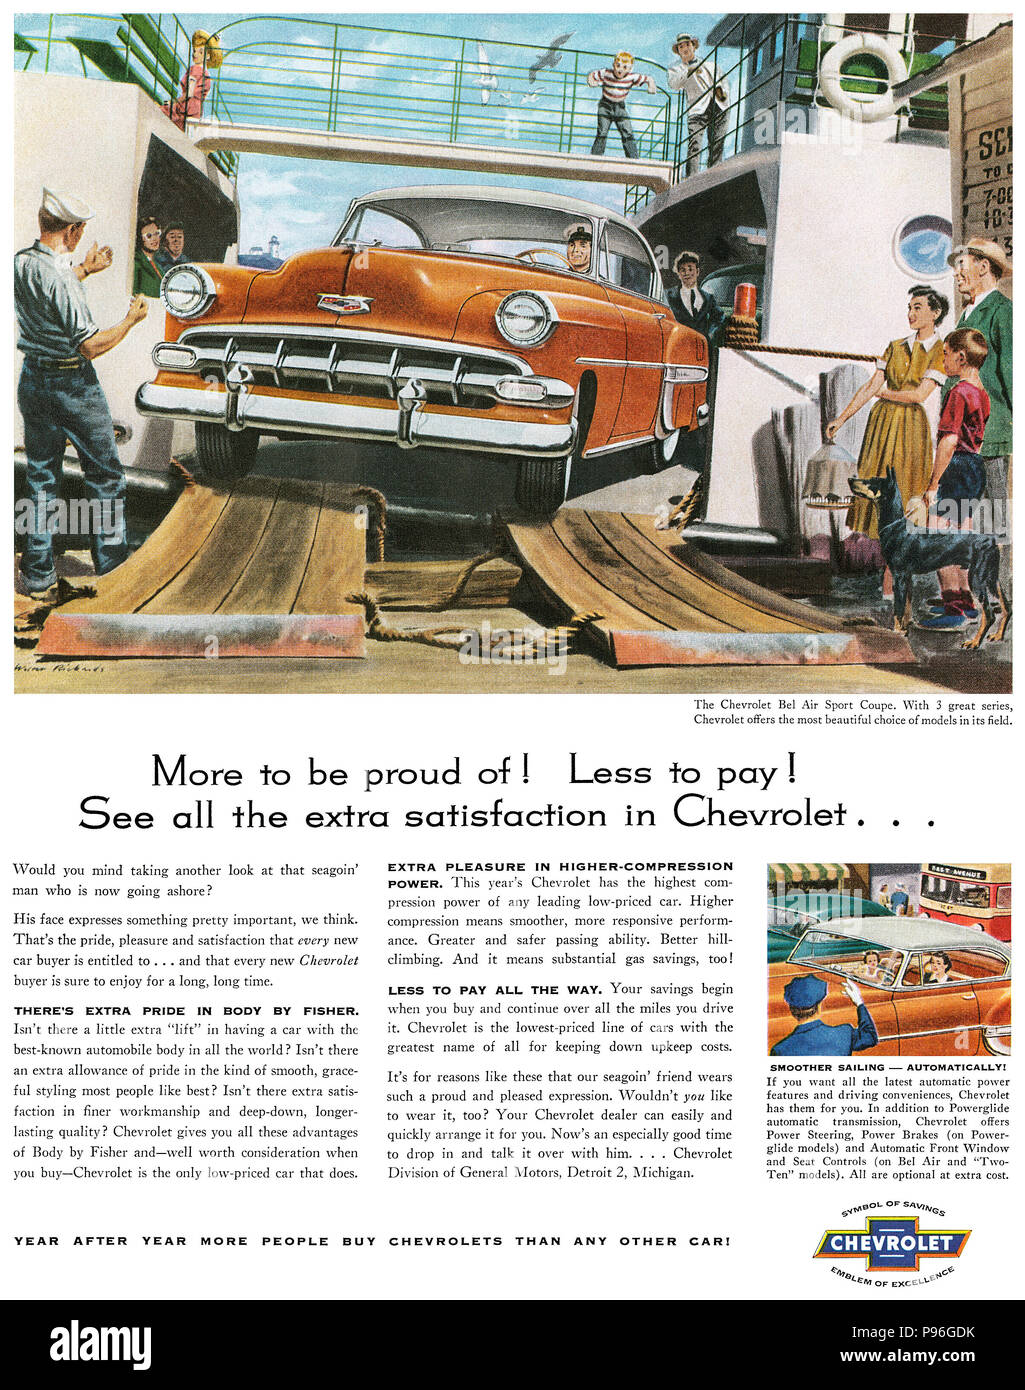 1954 U.S. advertisement for the Chevrolet Bel Air Sport Coupe. Stock Photo